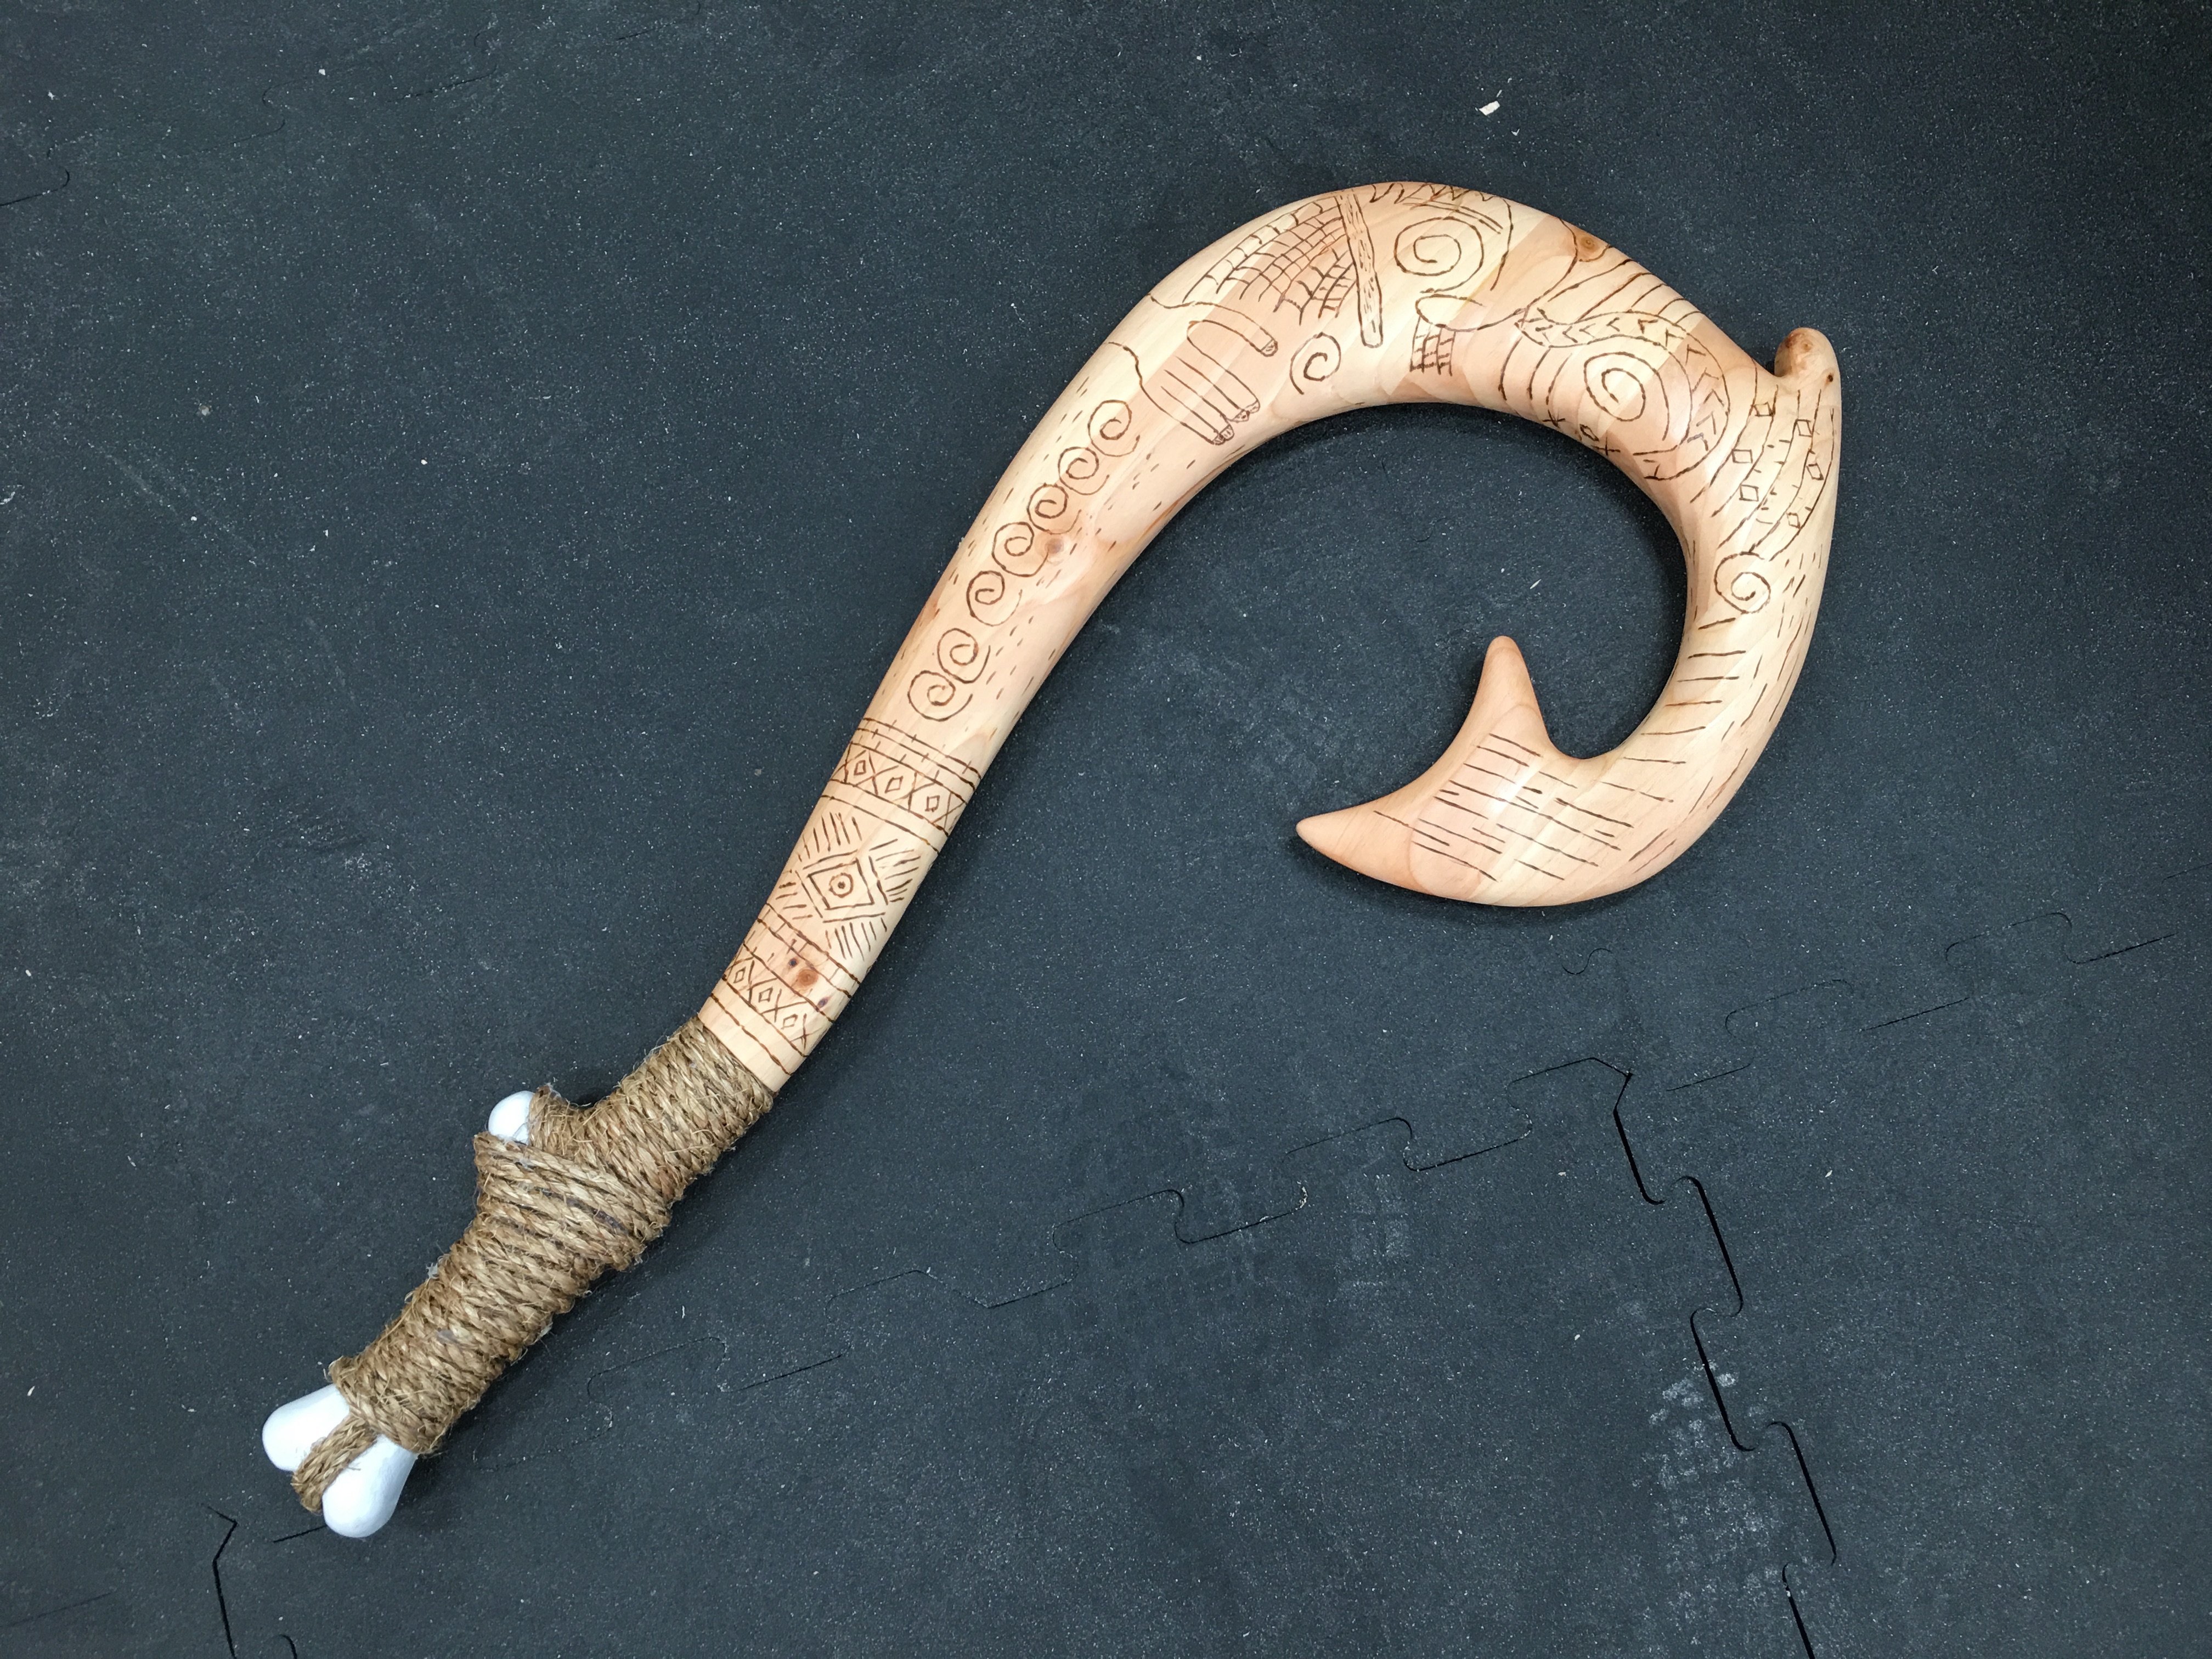 Make a Kid Size Maui's Hook From a 2x4 - The Wood Whisperer